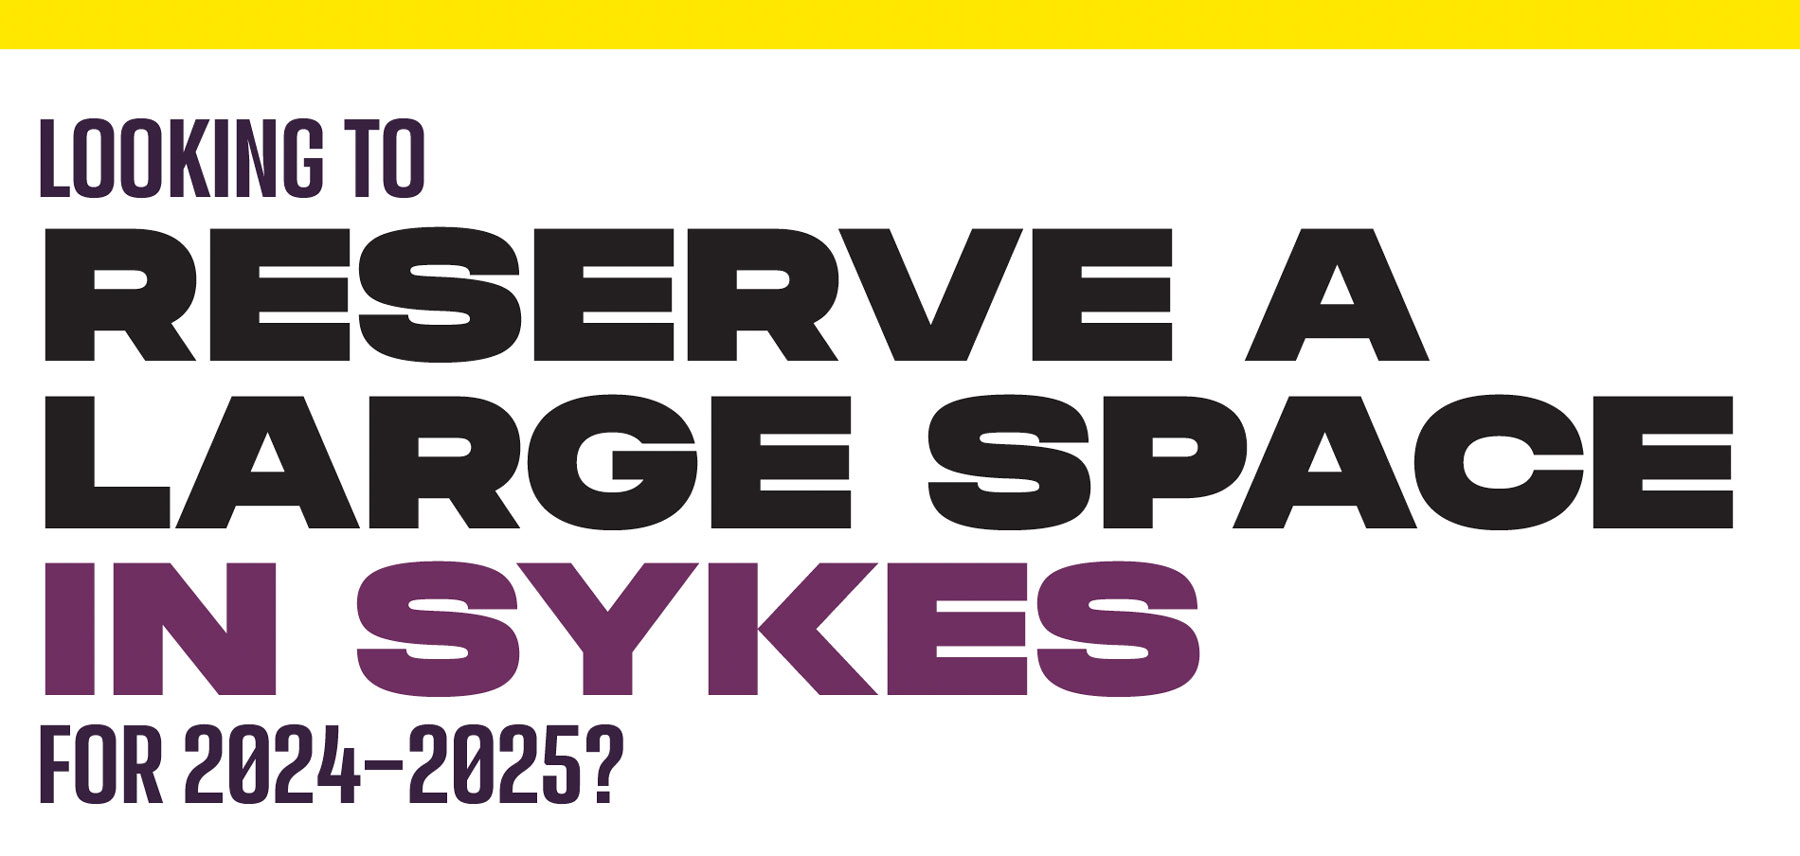 Looking to reserve a large space in Sykes for 2024-2025?